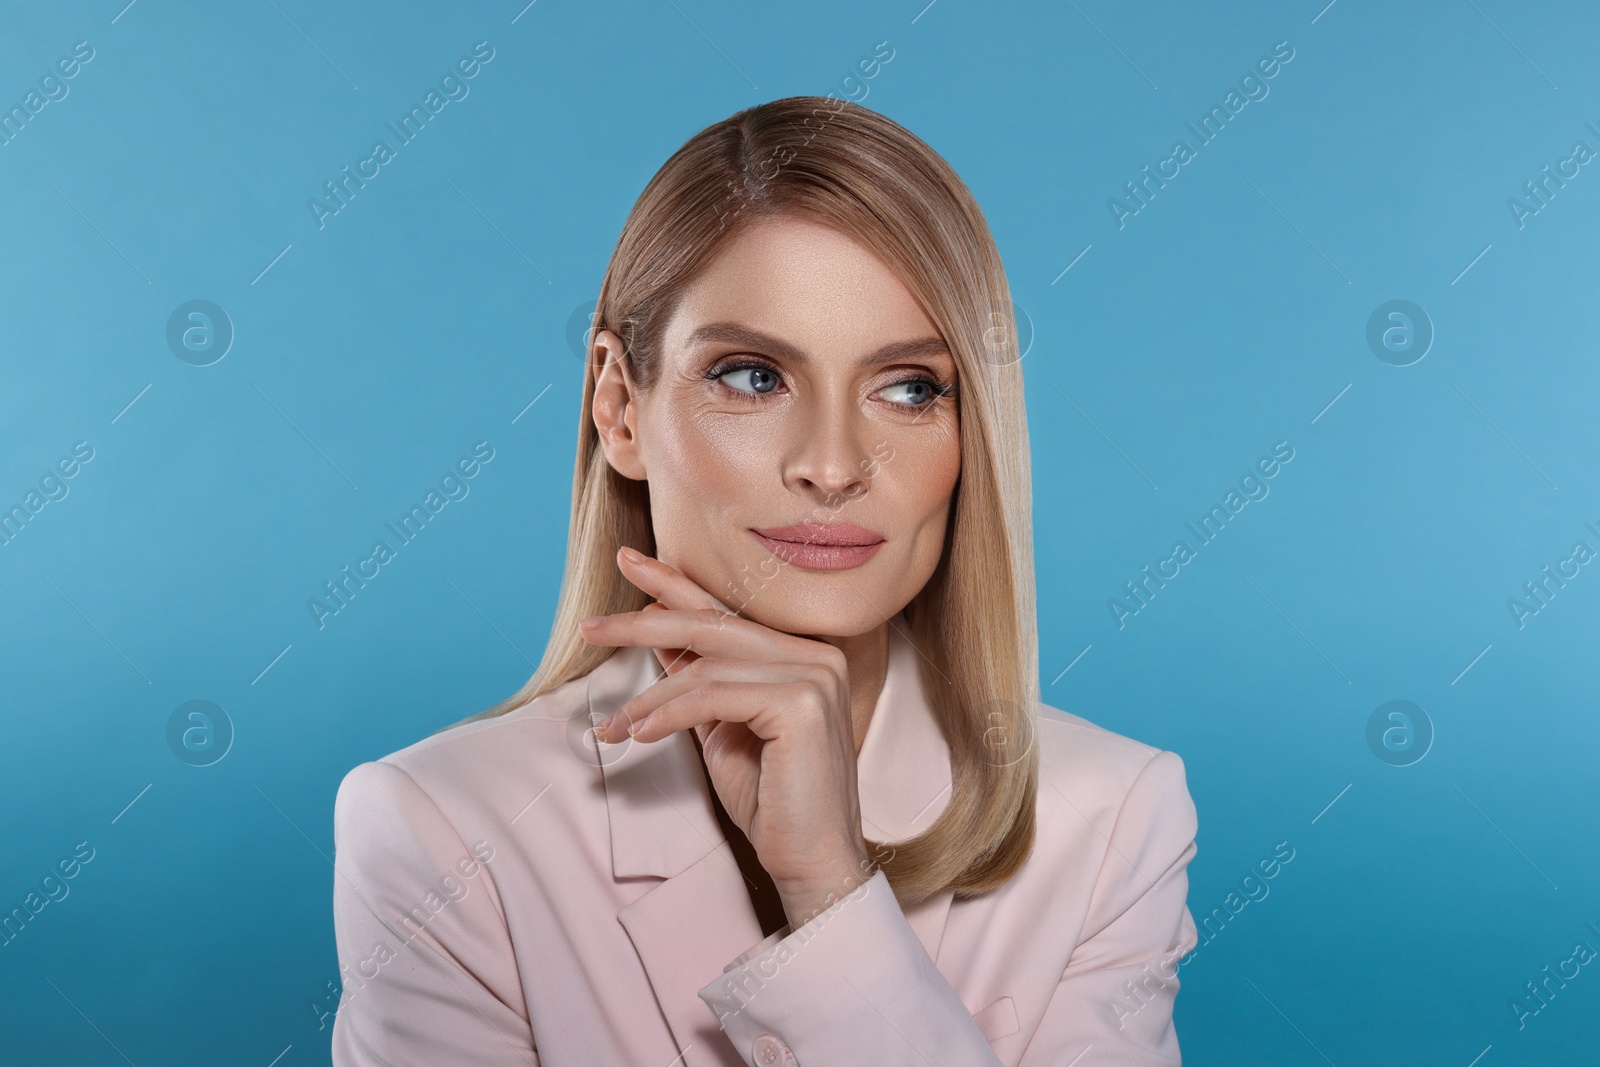 Image of Portrait of stylish attractive woman with blonde hair on light blue background